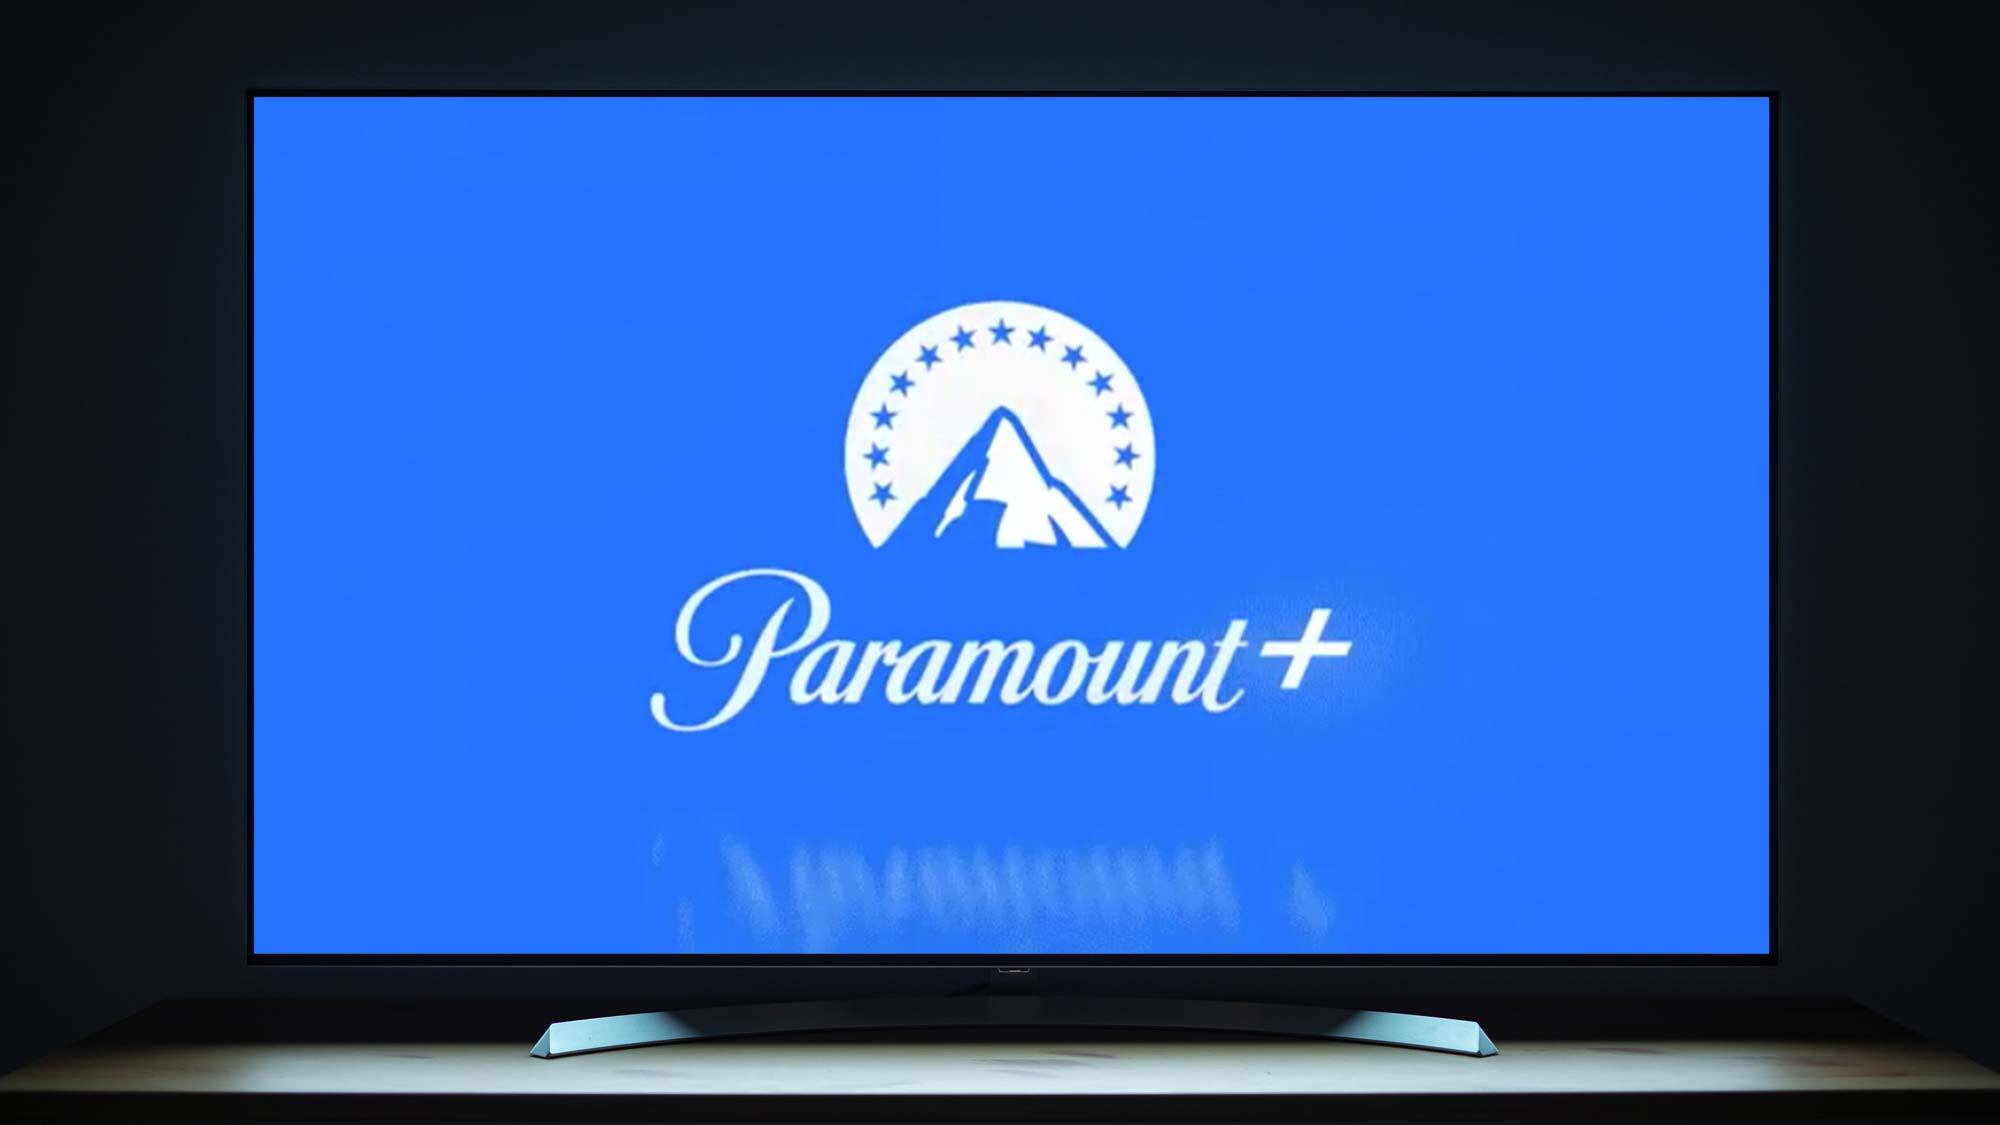 How Do I Get Paramount Plus On My Smart TV?